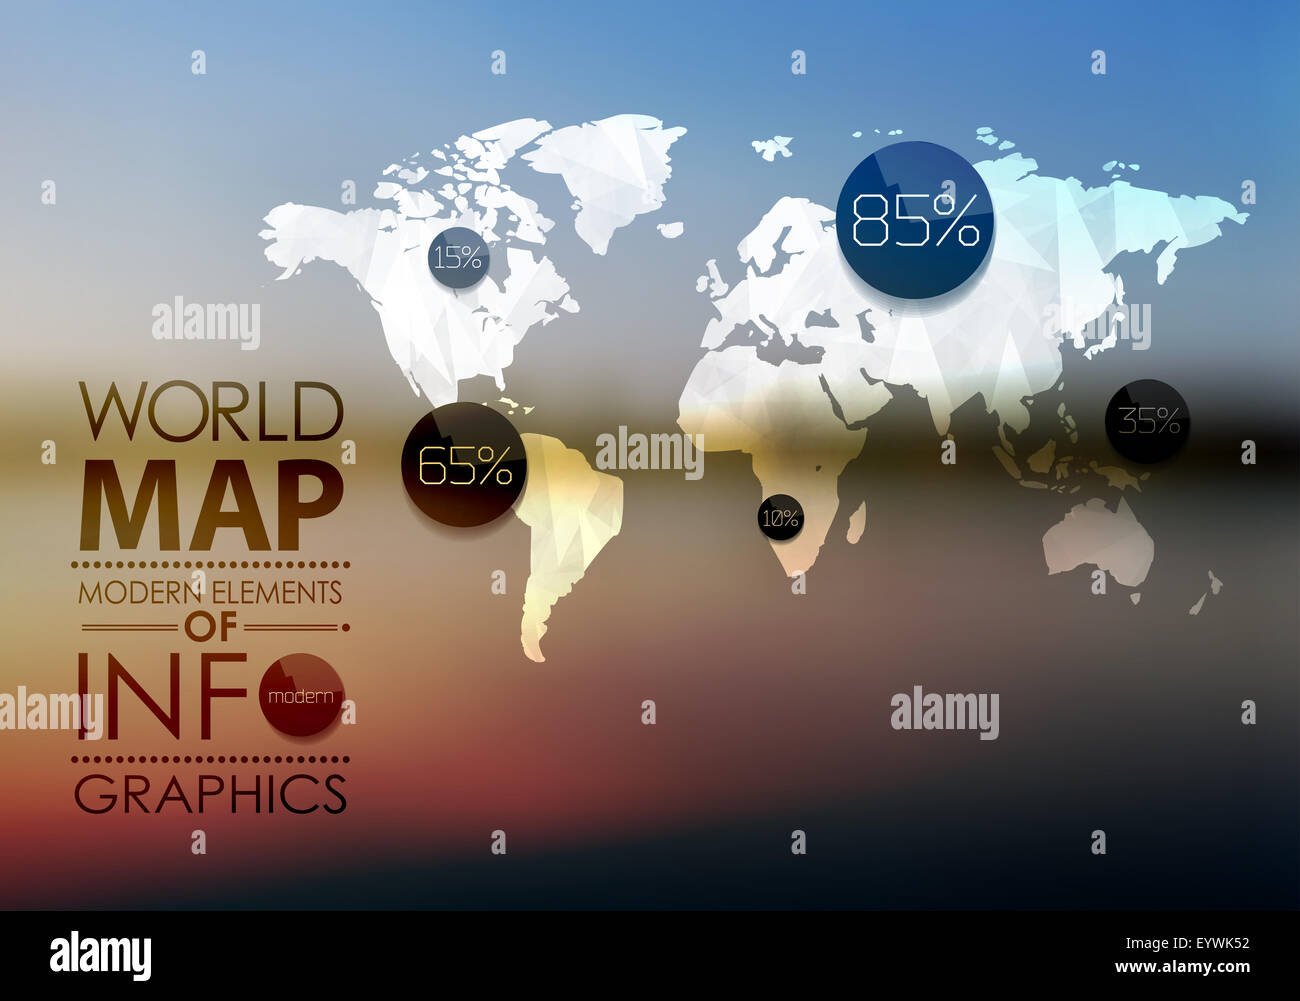 World Map and Information Graphics Stock Photo